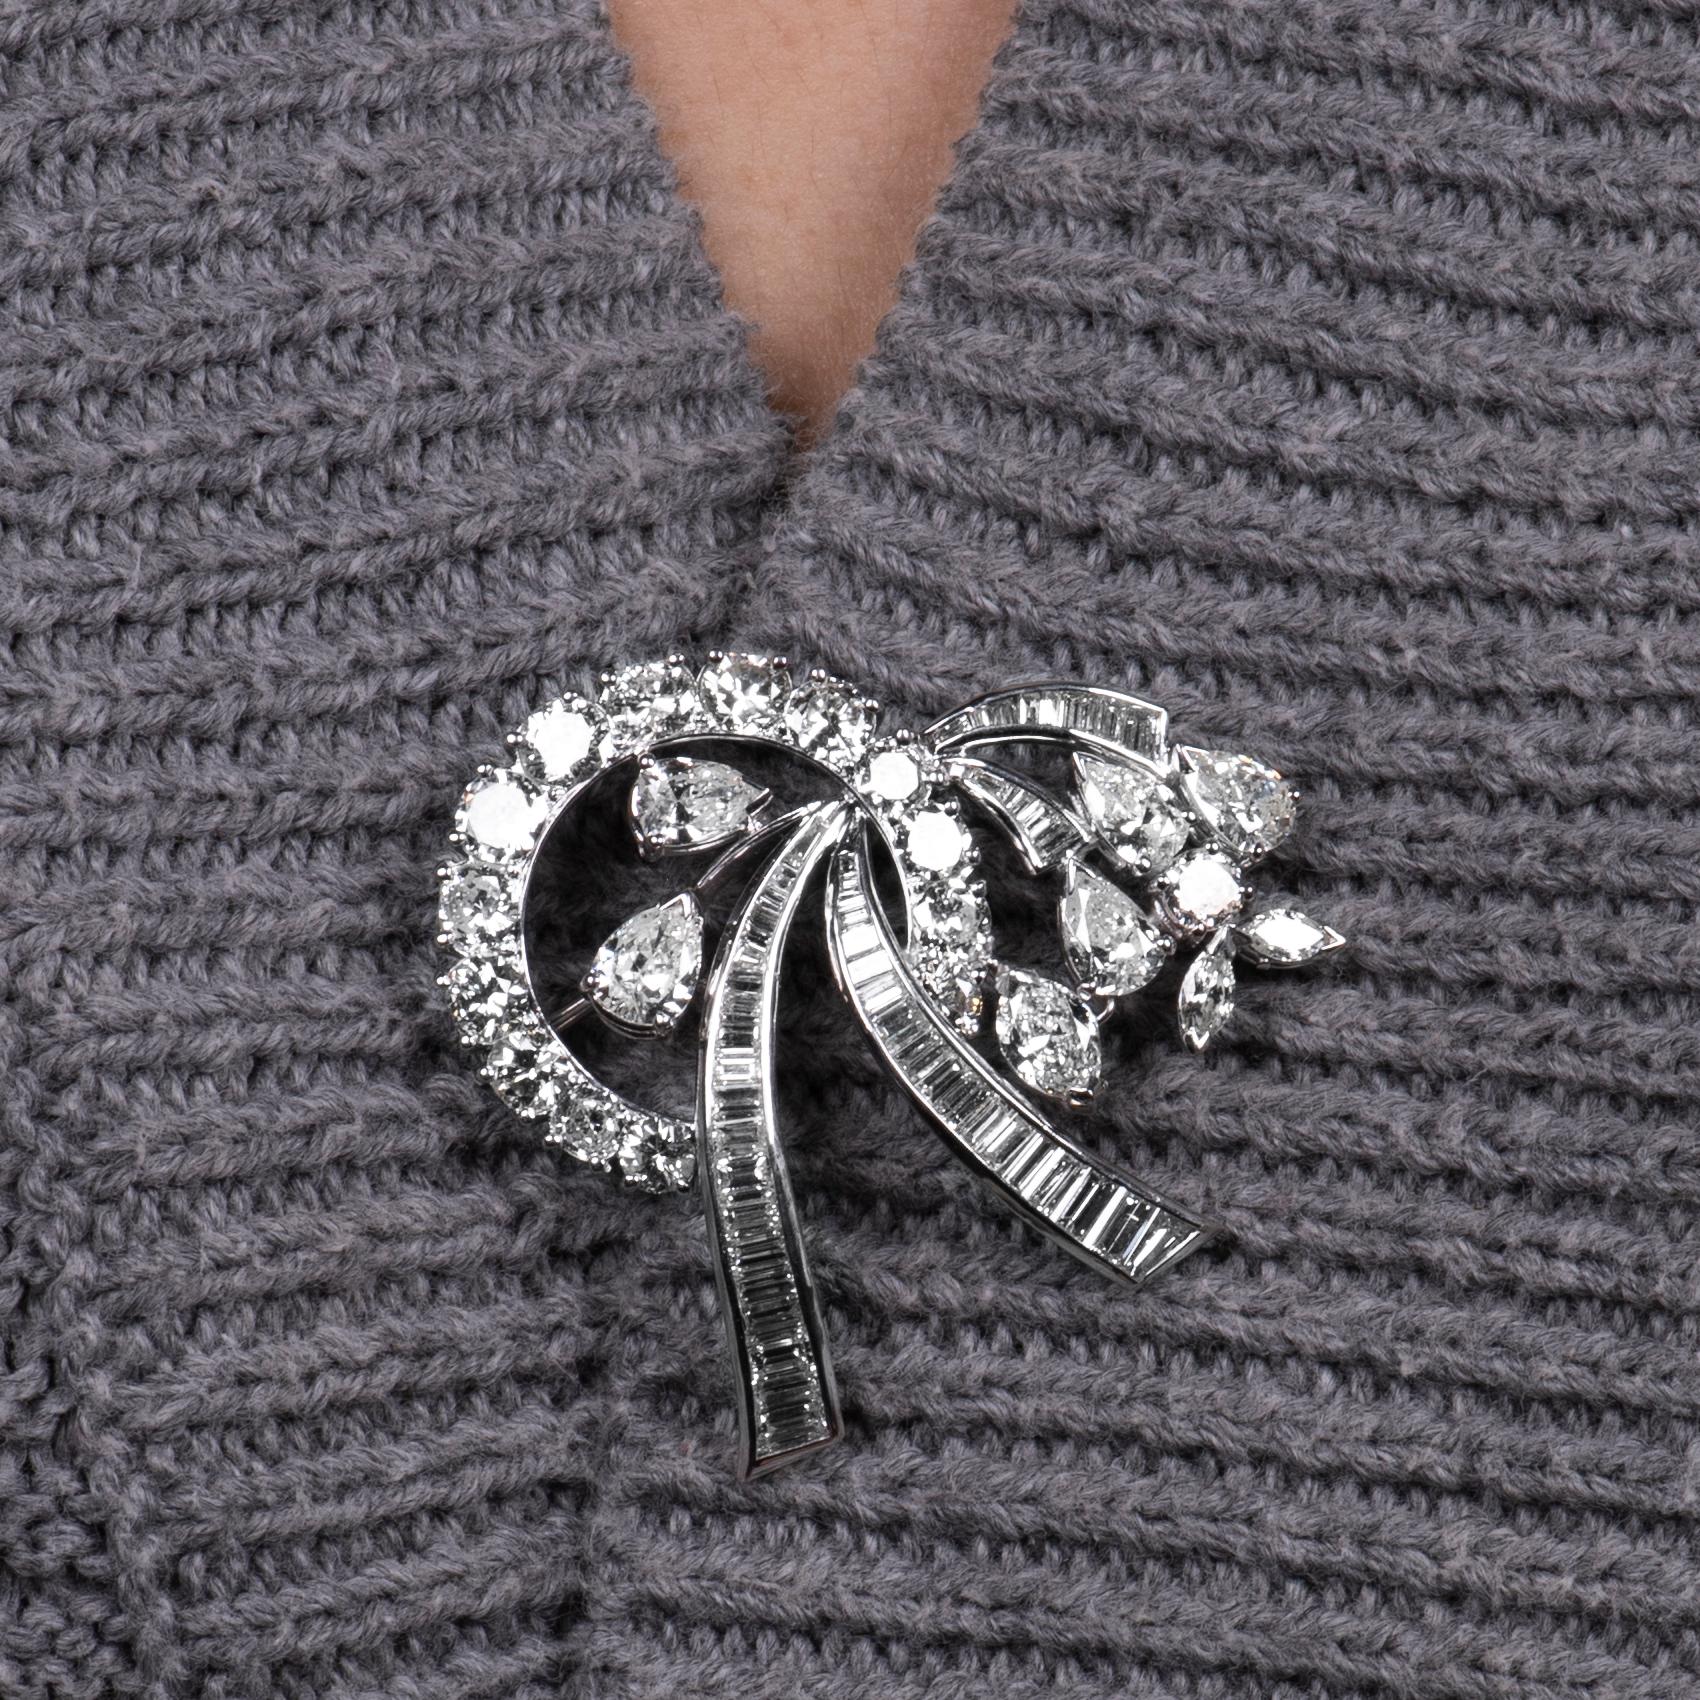 Beautiful ribbon floral design convertible brooch and pendant with approximately 8.0 carats total weight in mixed shaped diamonds set in 18K. Chain not included.
Hallmark: VAN CLIEF

Diamond quality: Approximately H-J color, VS2-SI2 average clarity.